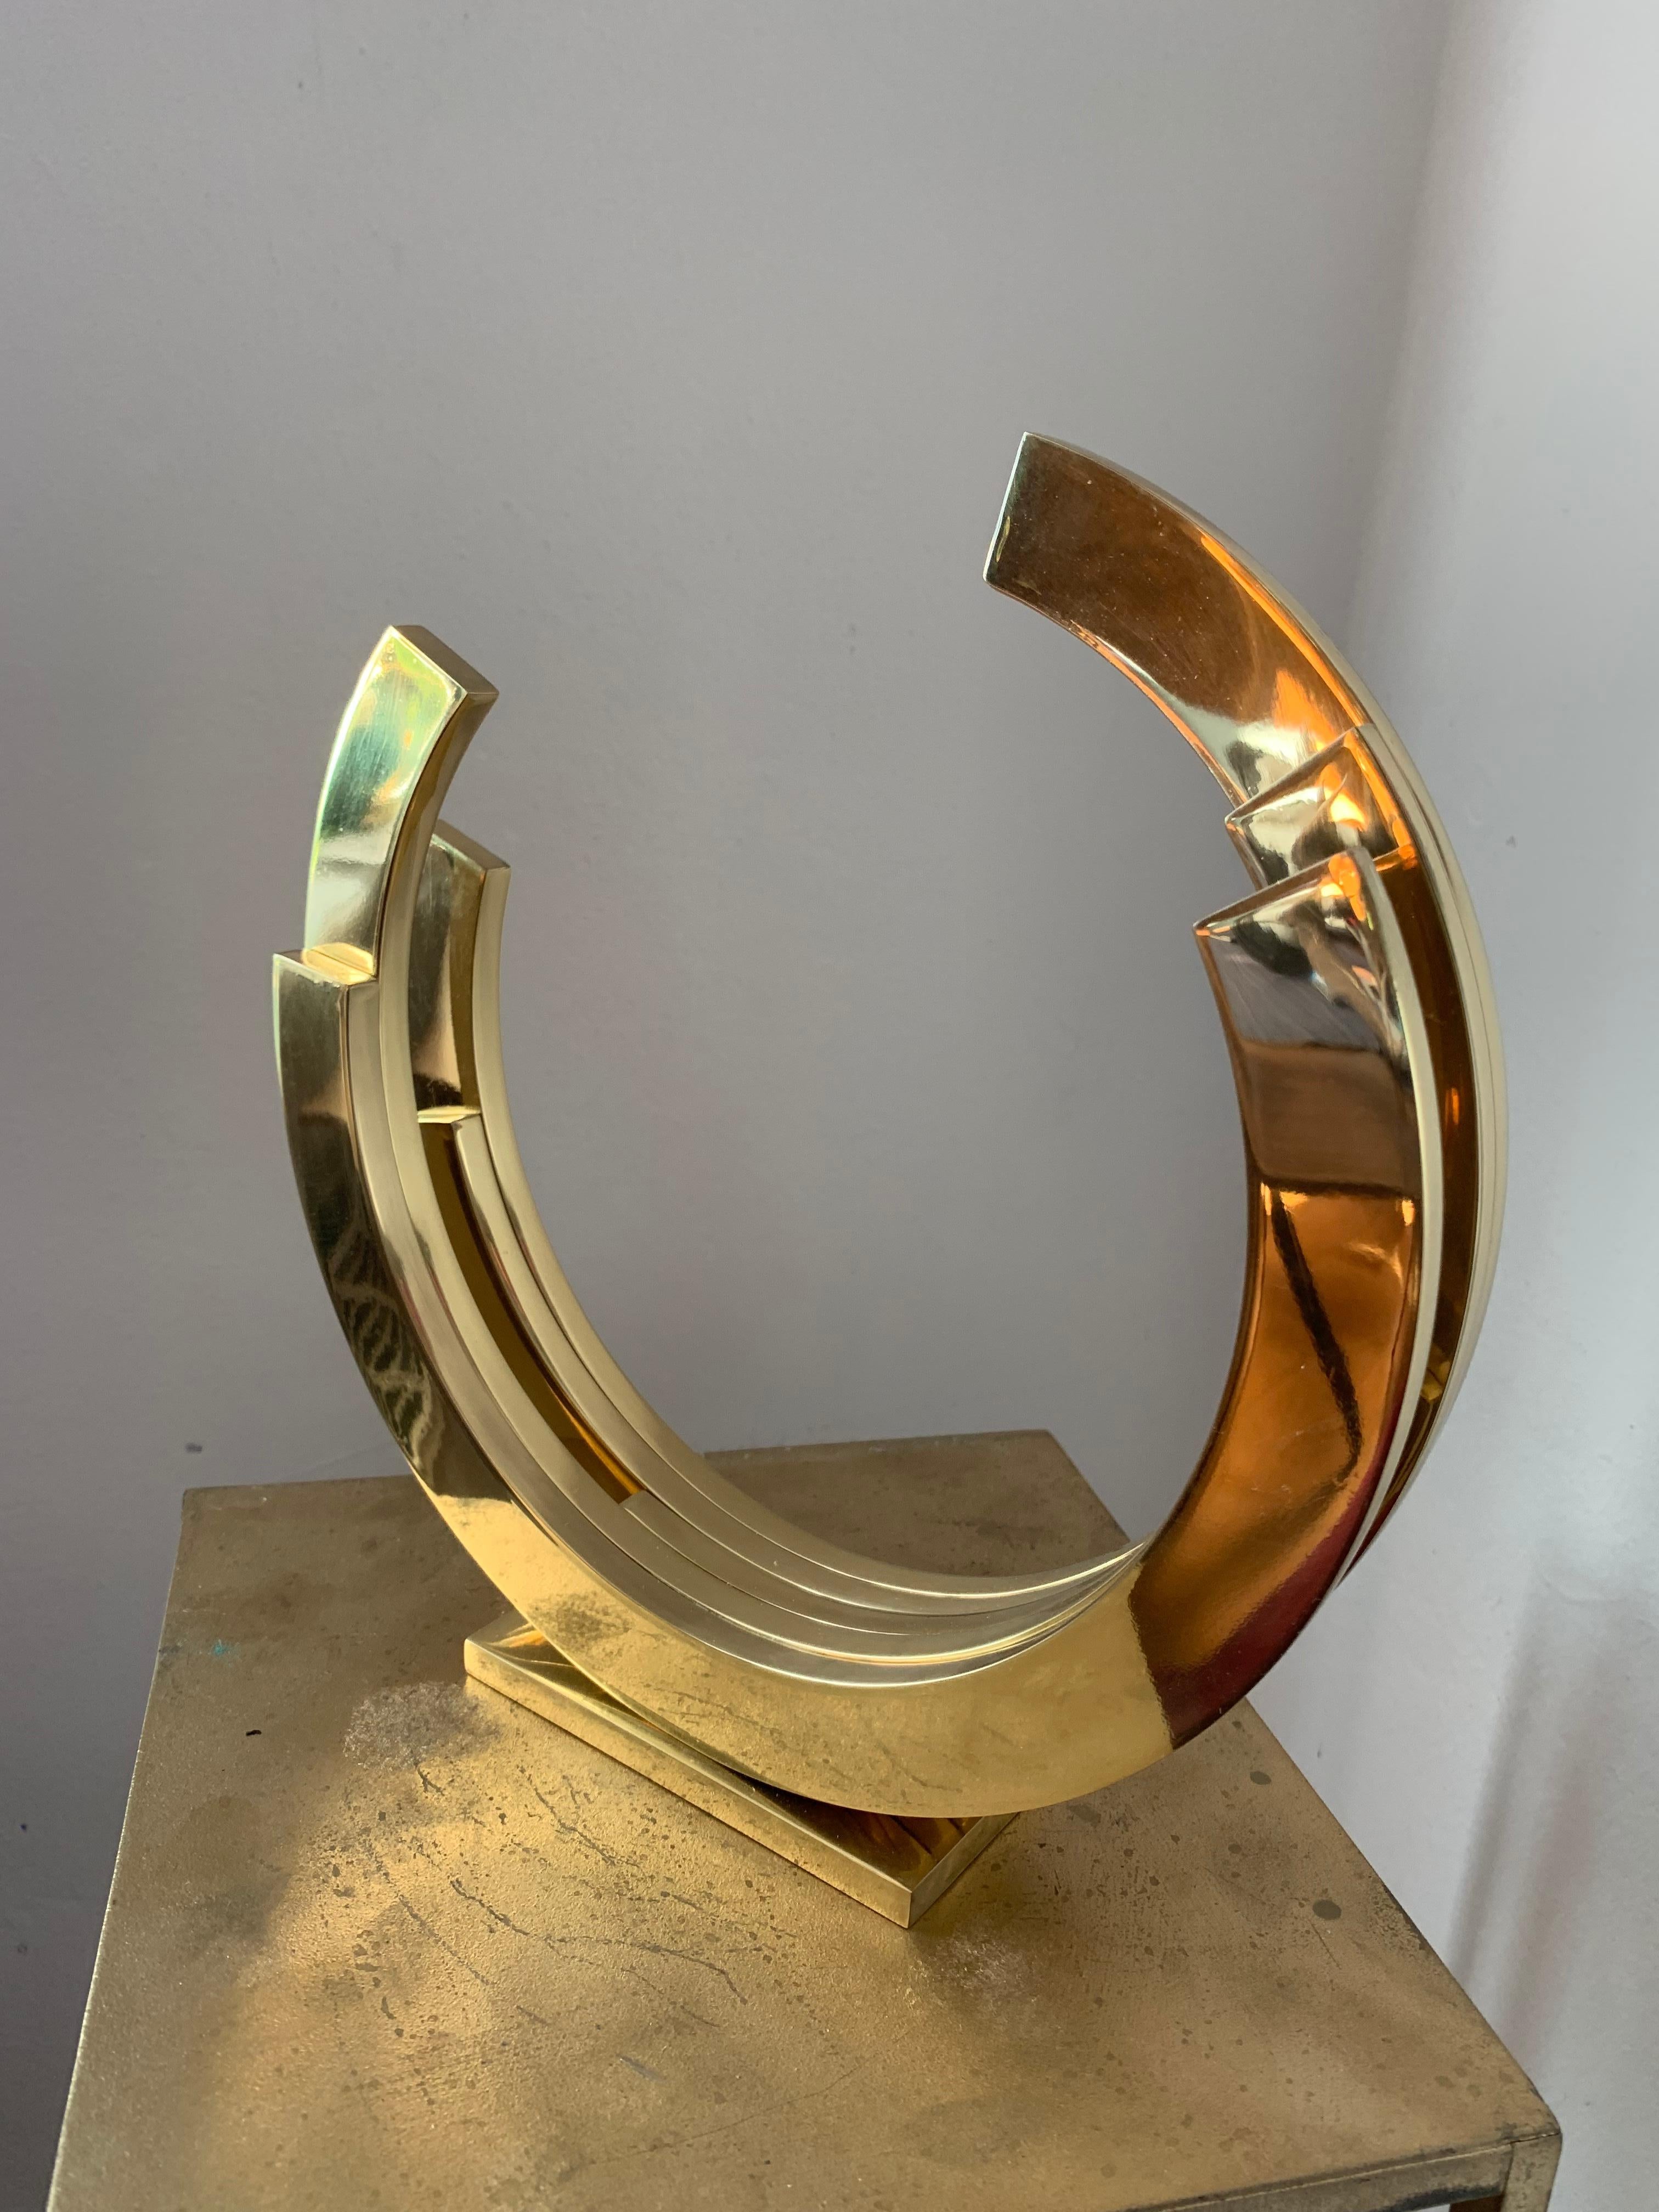 Golden Orbit by Kuno Vollet - Contemporary brass sculpture with marble base For Sale 3